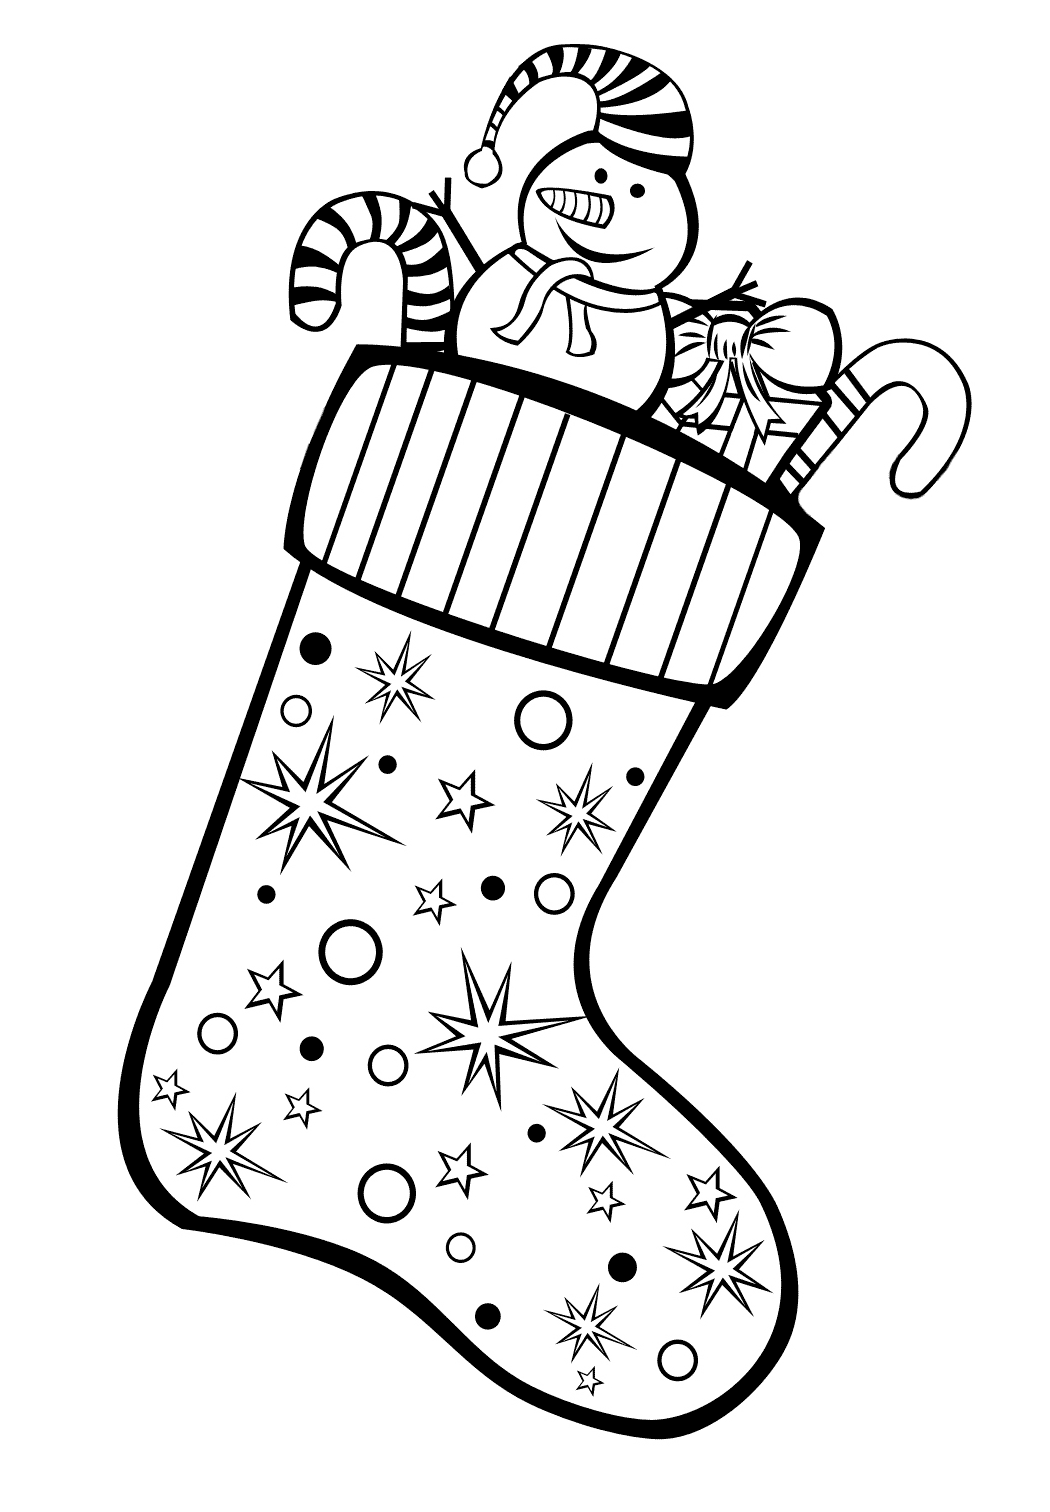 Coloring page - Stocking full of gifts